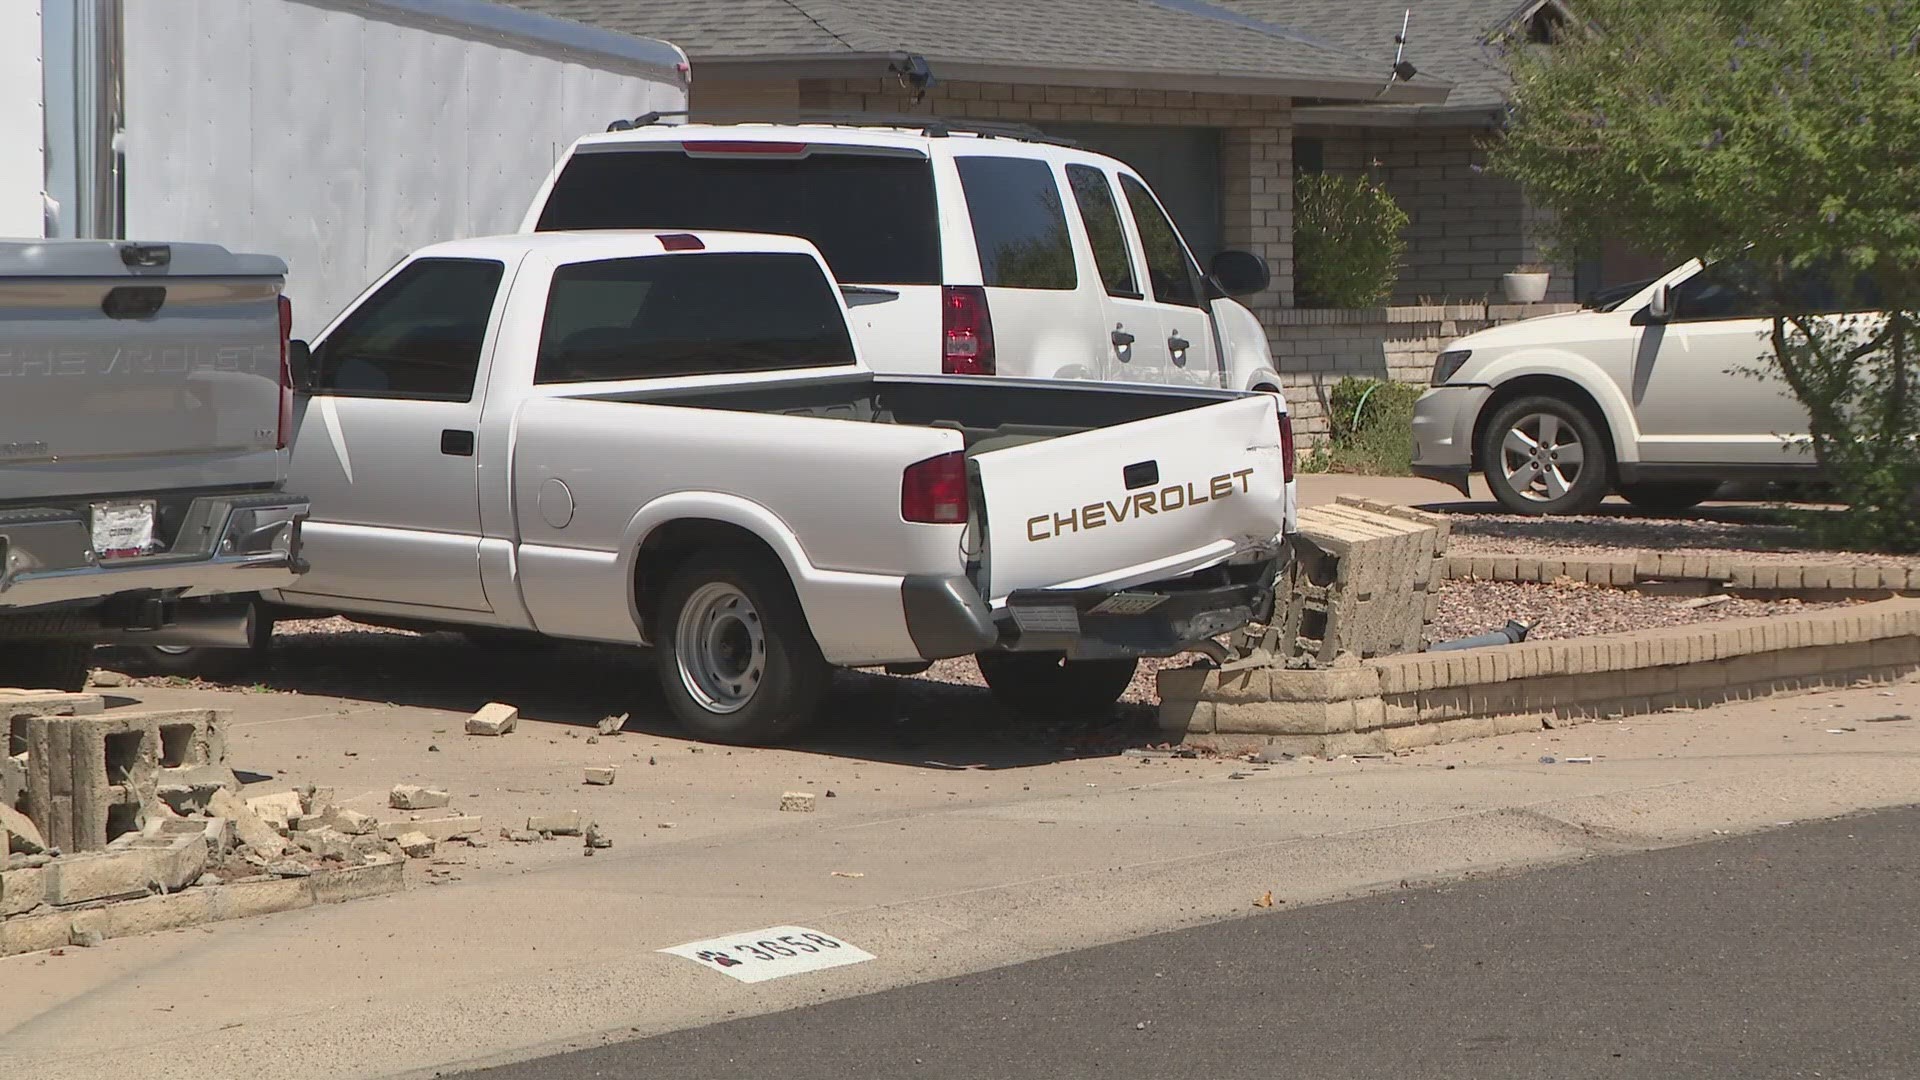 Teen hospitalized with life-threatening injuries after West Valley